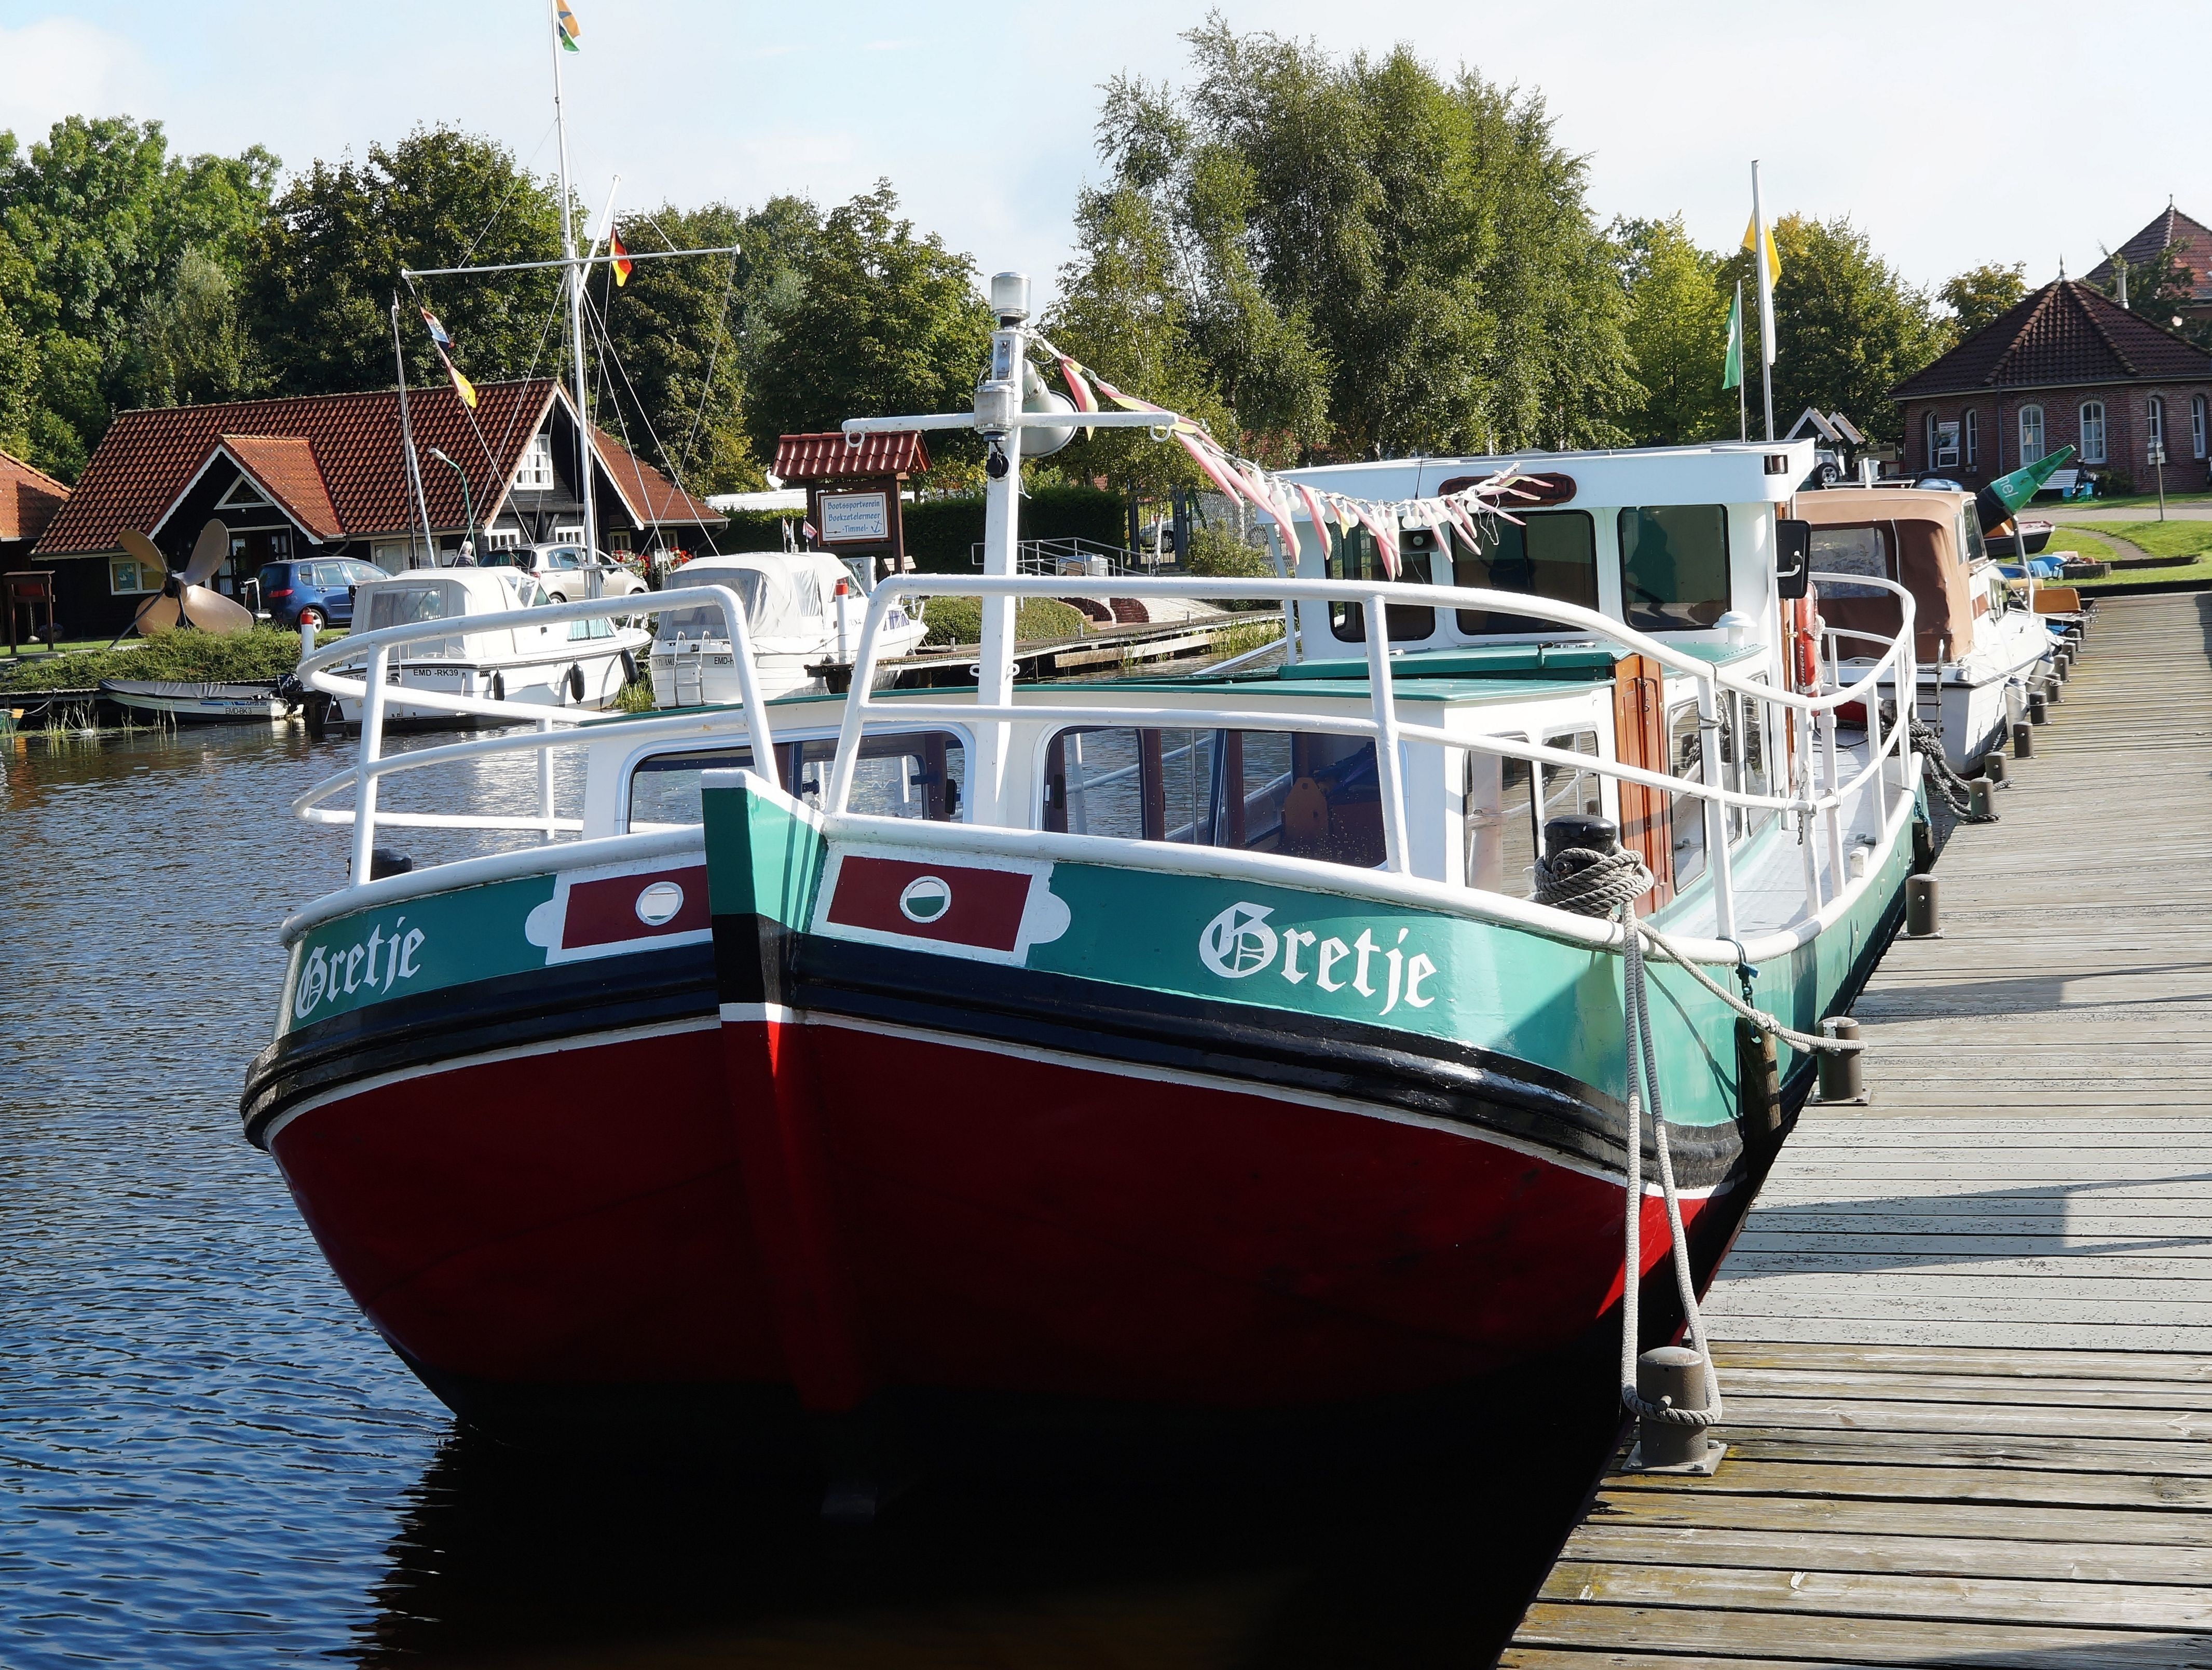 green, white, and maroon Bretje boat on a dock